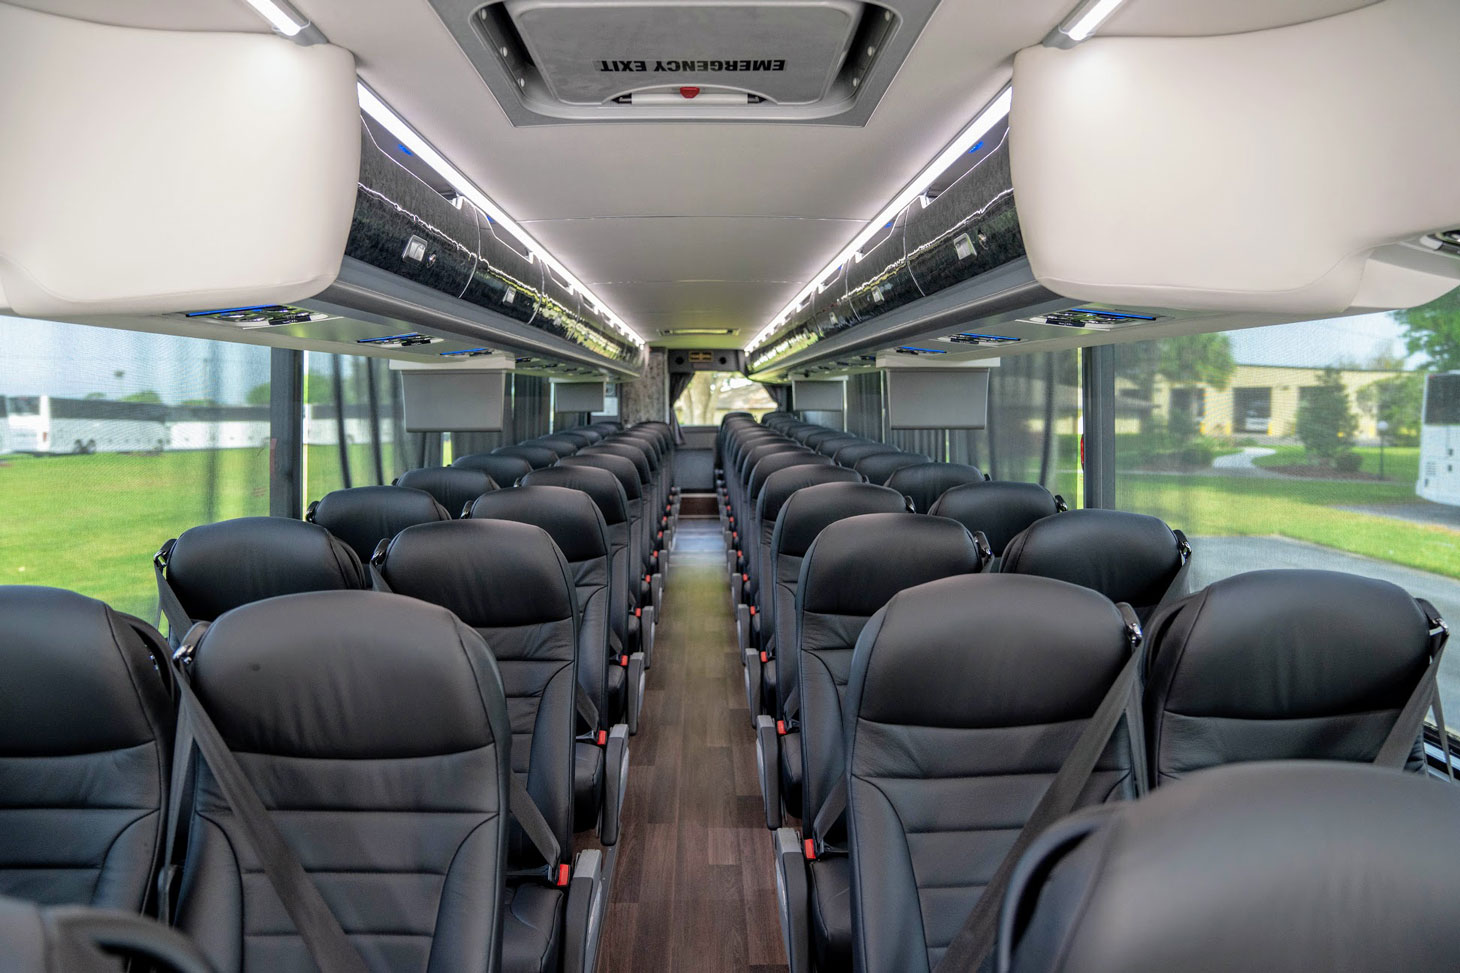 4 Major Differences Between Charter and Tour Buses